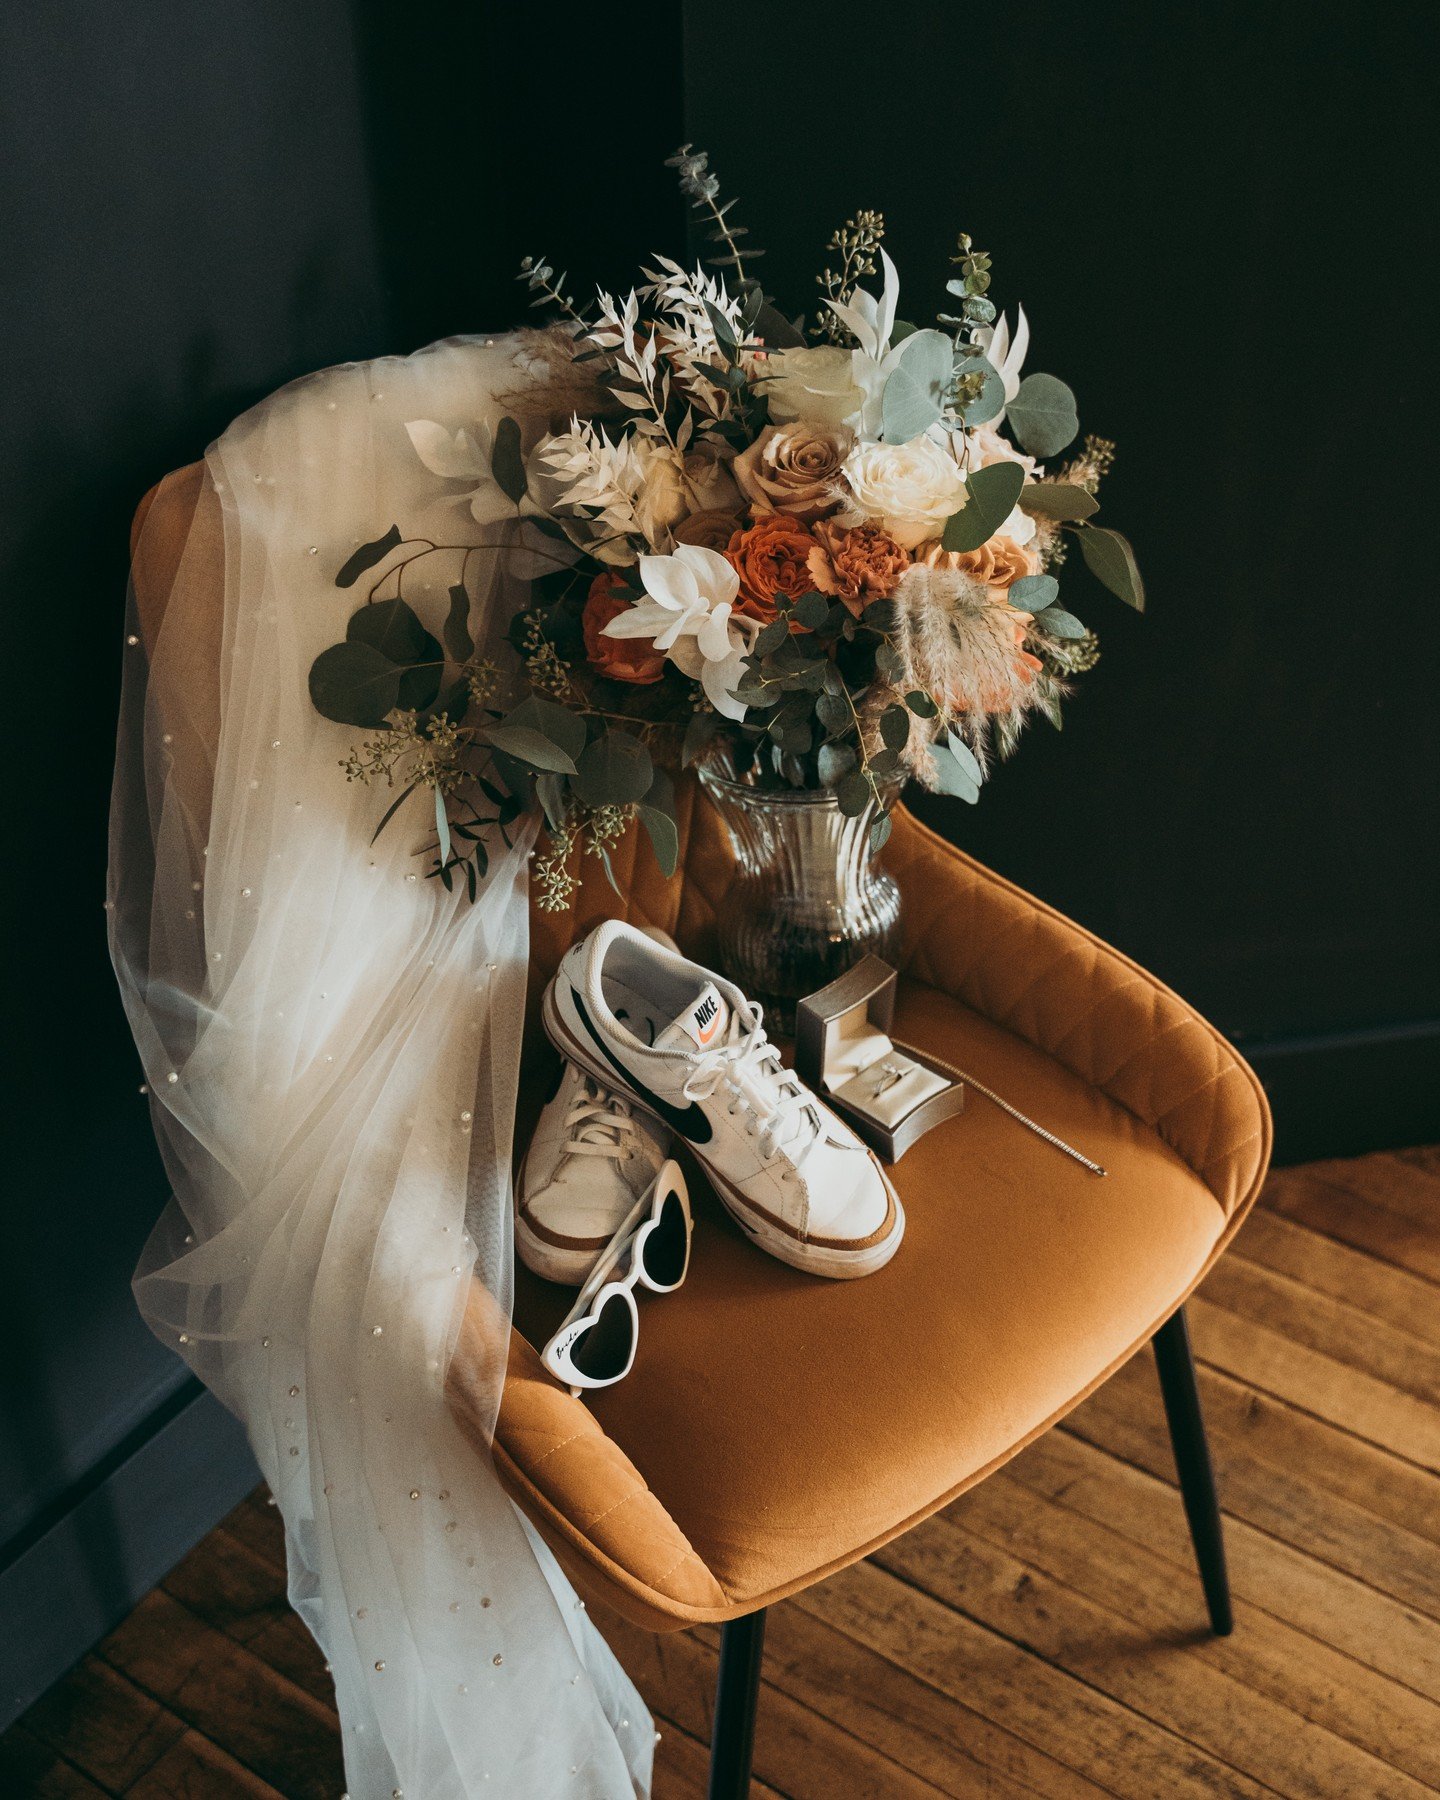 Saturdays are for weddings! 💍

Are you planning to tie the knot in 2024? Saturdays are always the most popular days for weddings, and it's never too early to start planning. If you're looking for romantic, cinematic-quality videography or photograph